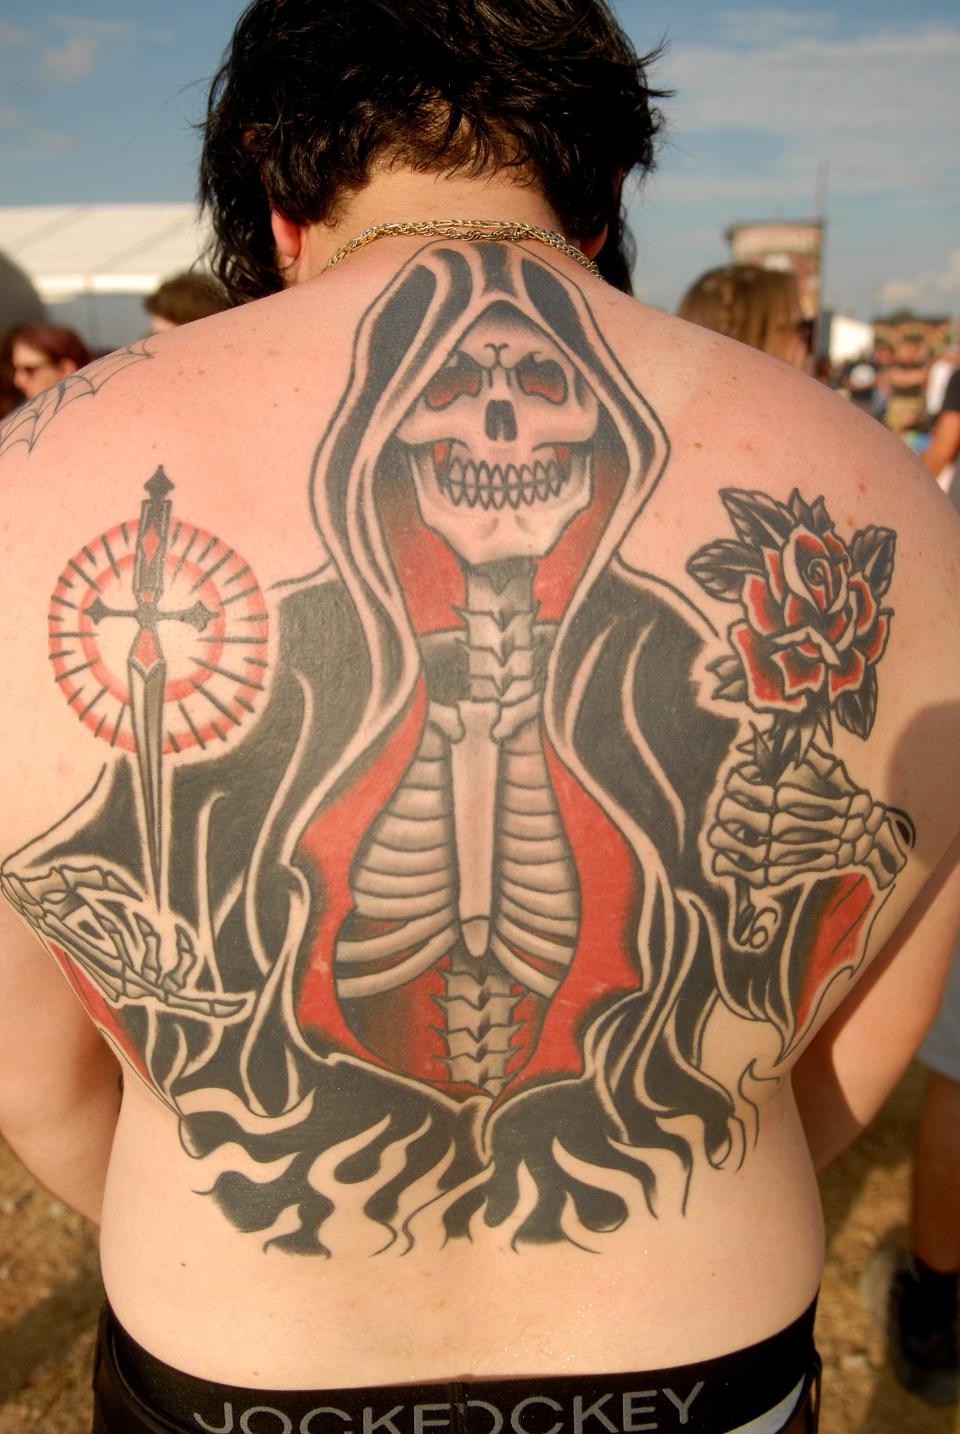 Nick Owen poses with his tattoo at Louder Than Life on Friday. Sept. 22, 2023